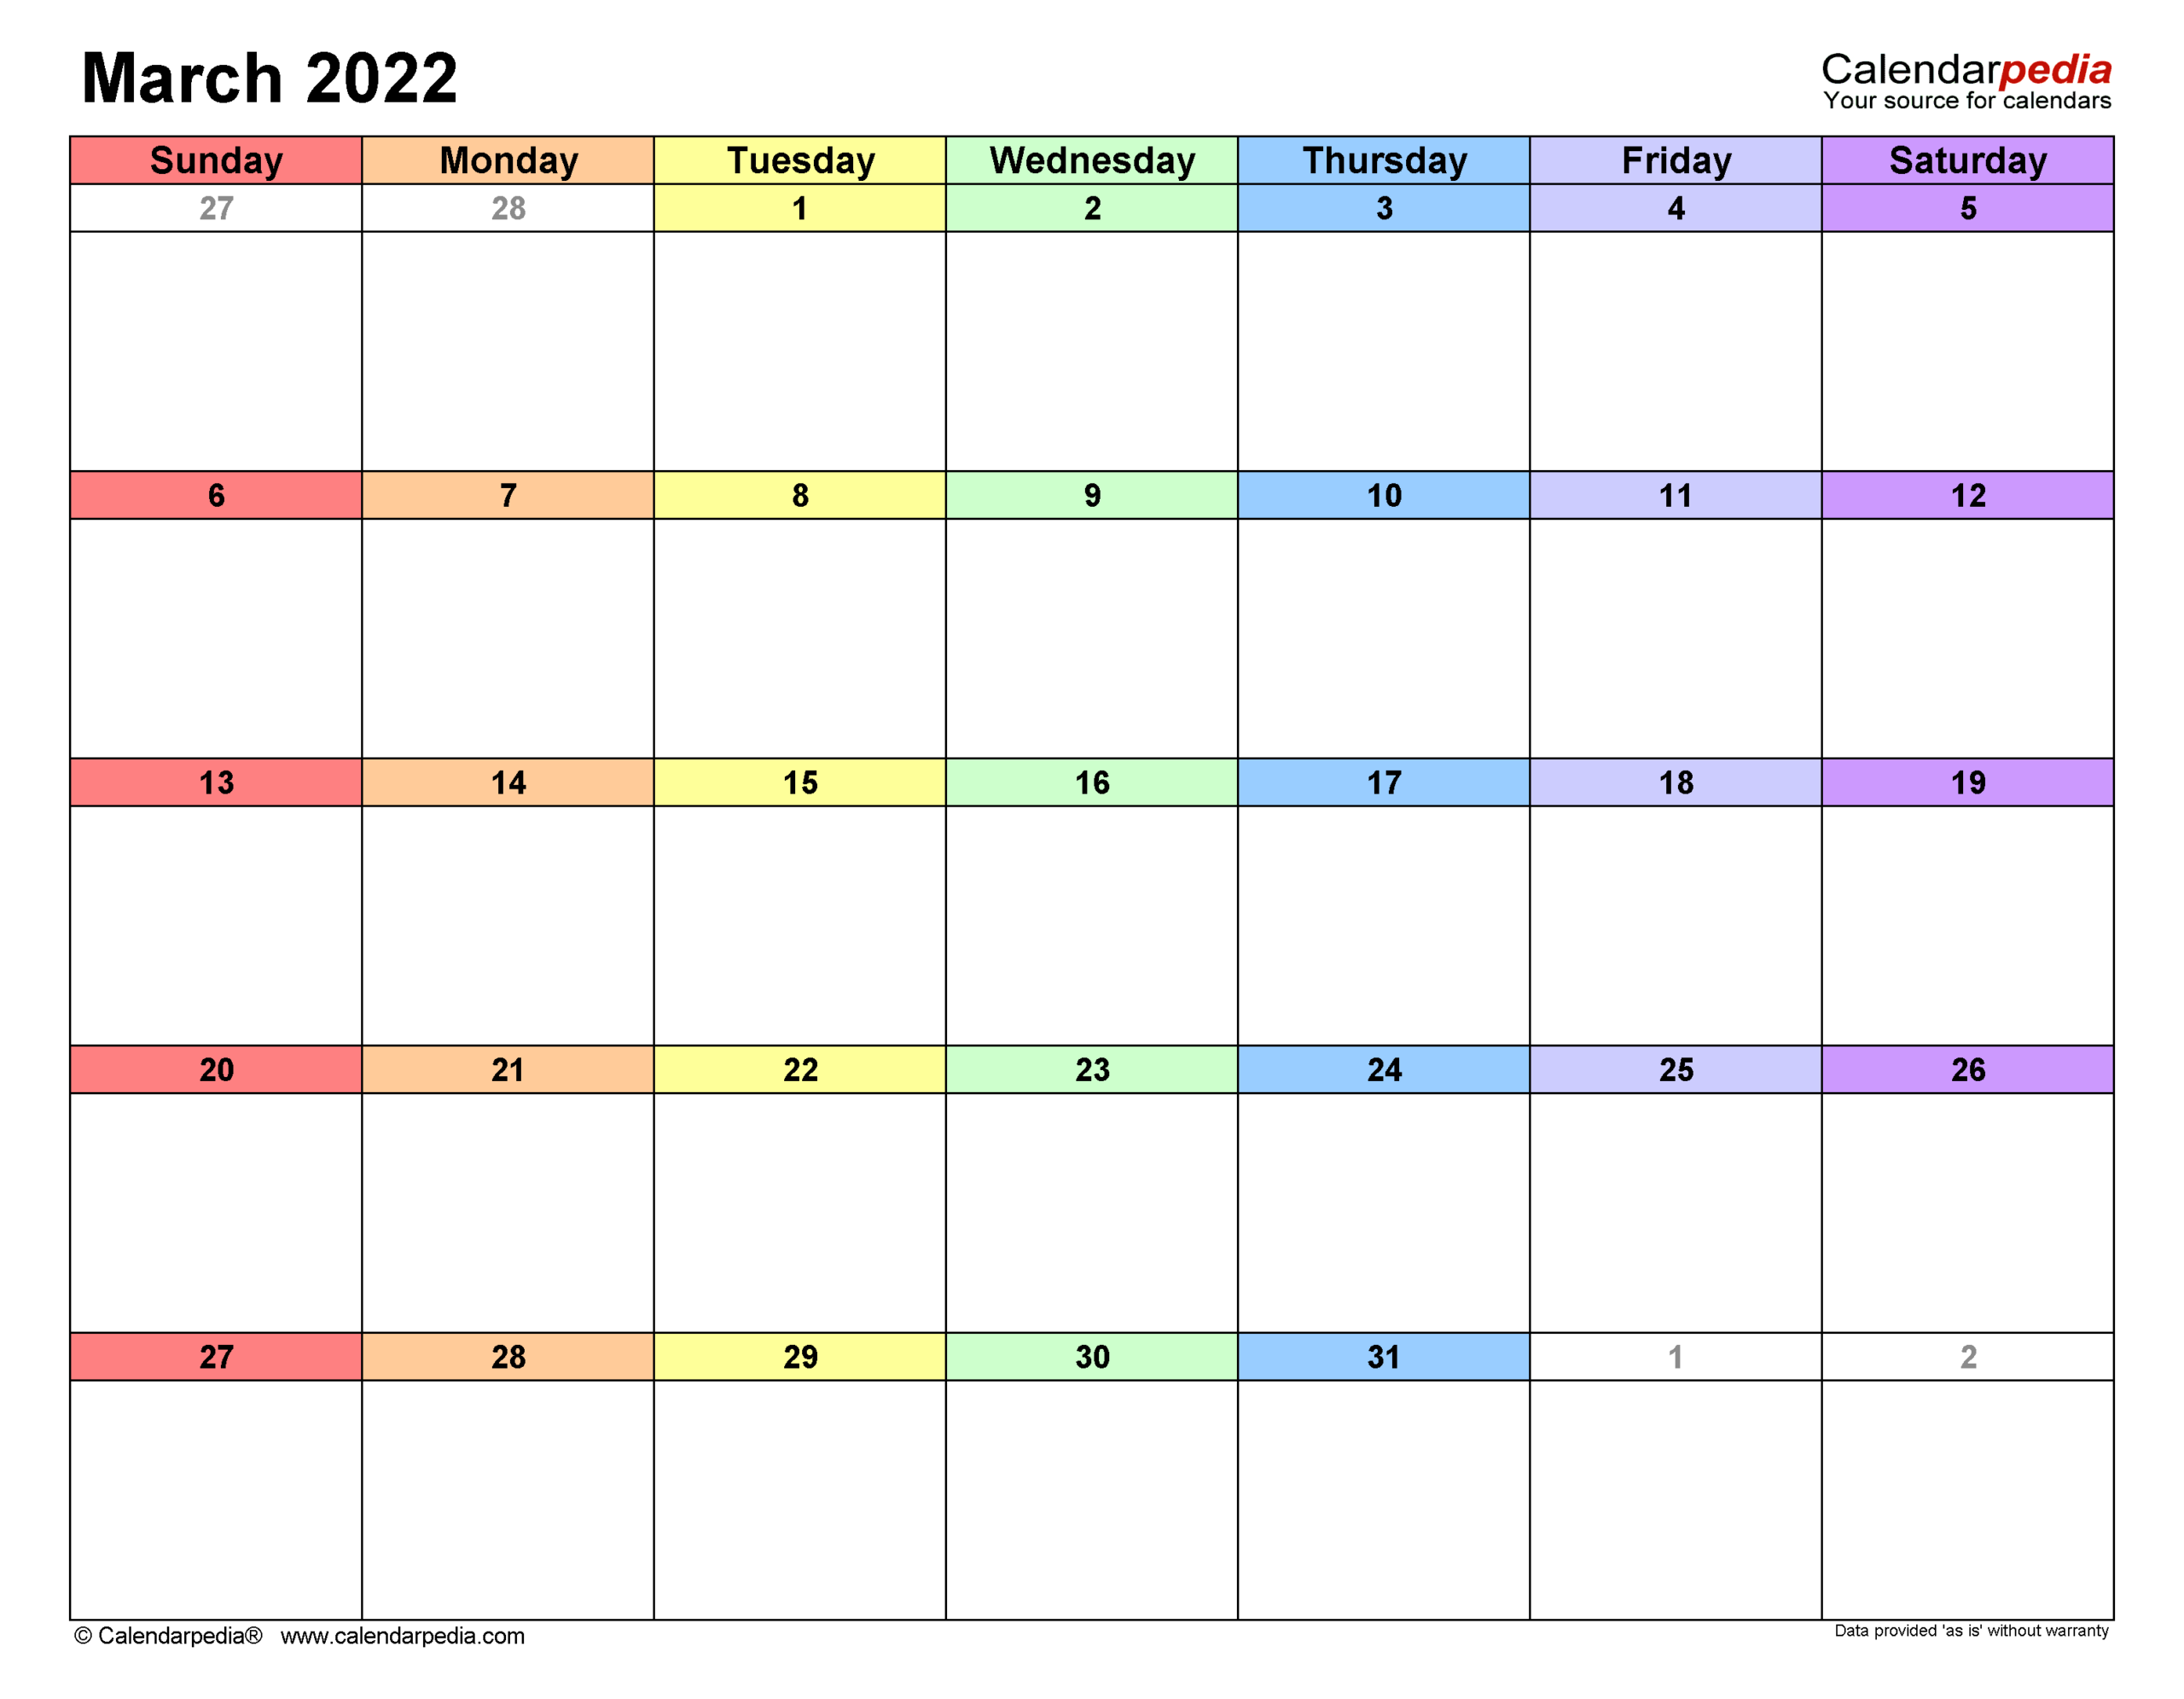 March 2022 Calendar | Templates For Word, Excel And Pdf with regard to March 2023 Calendar Printable Free